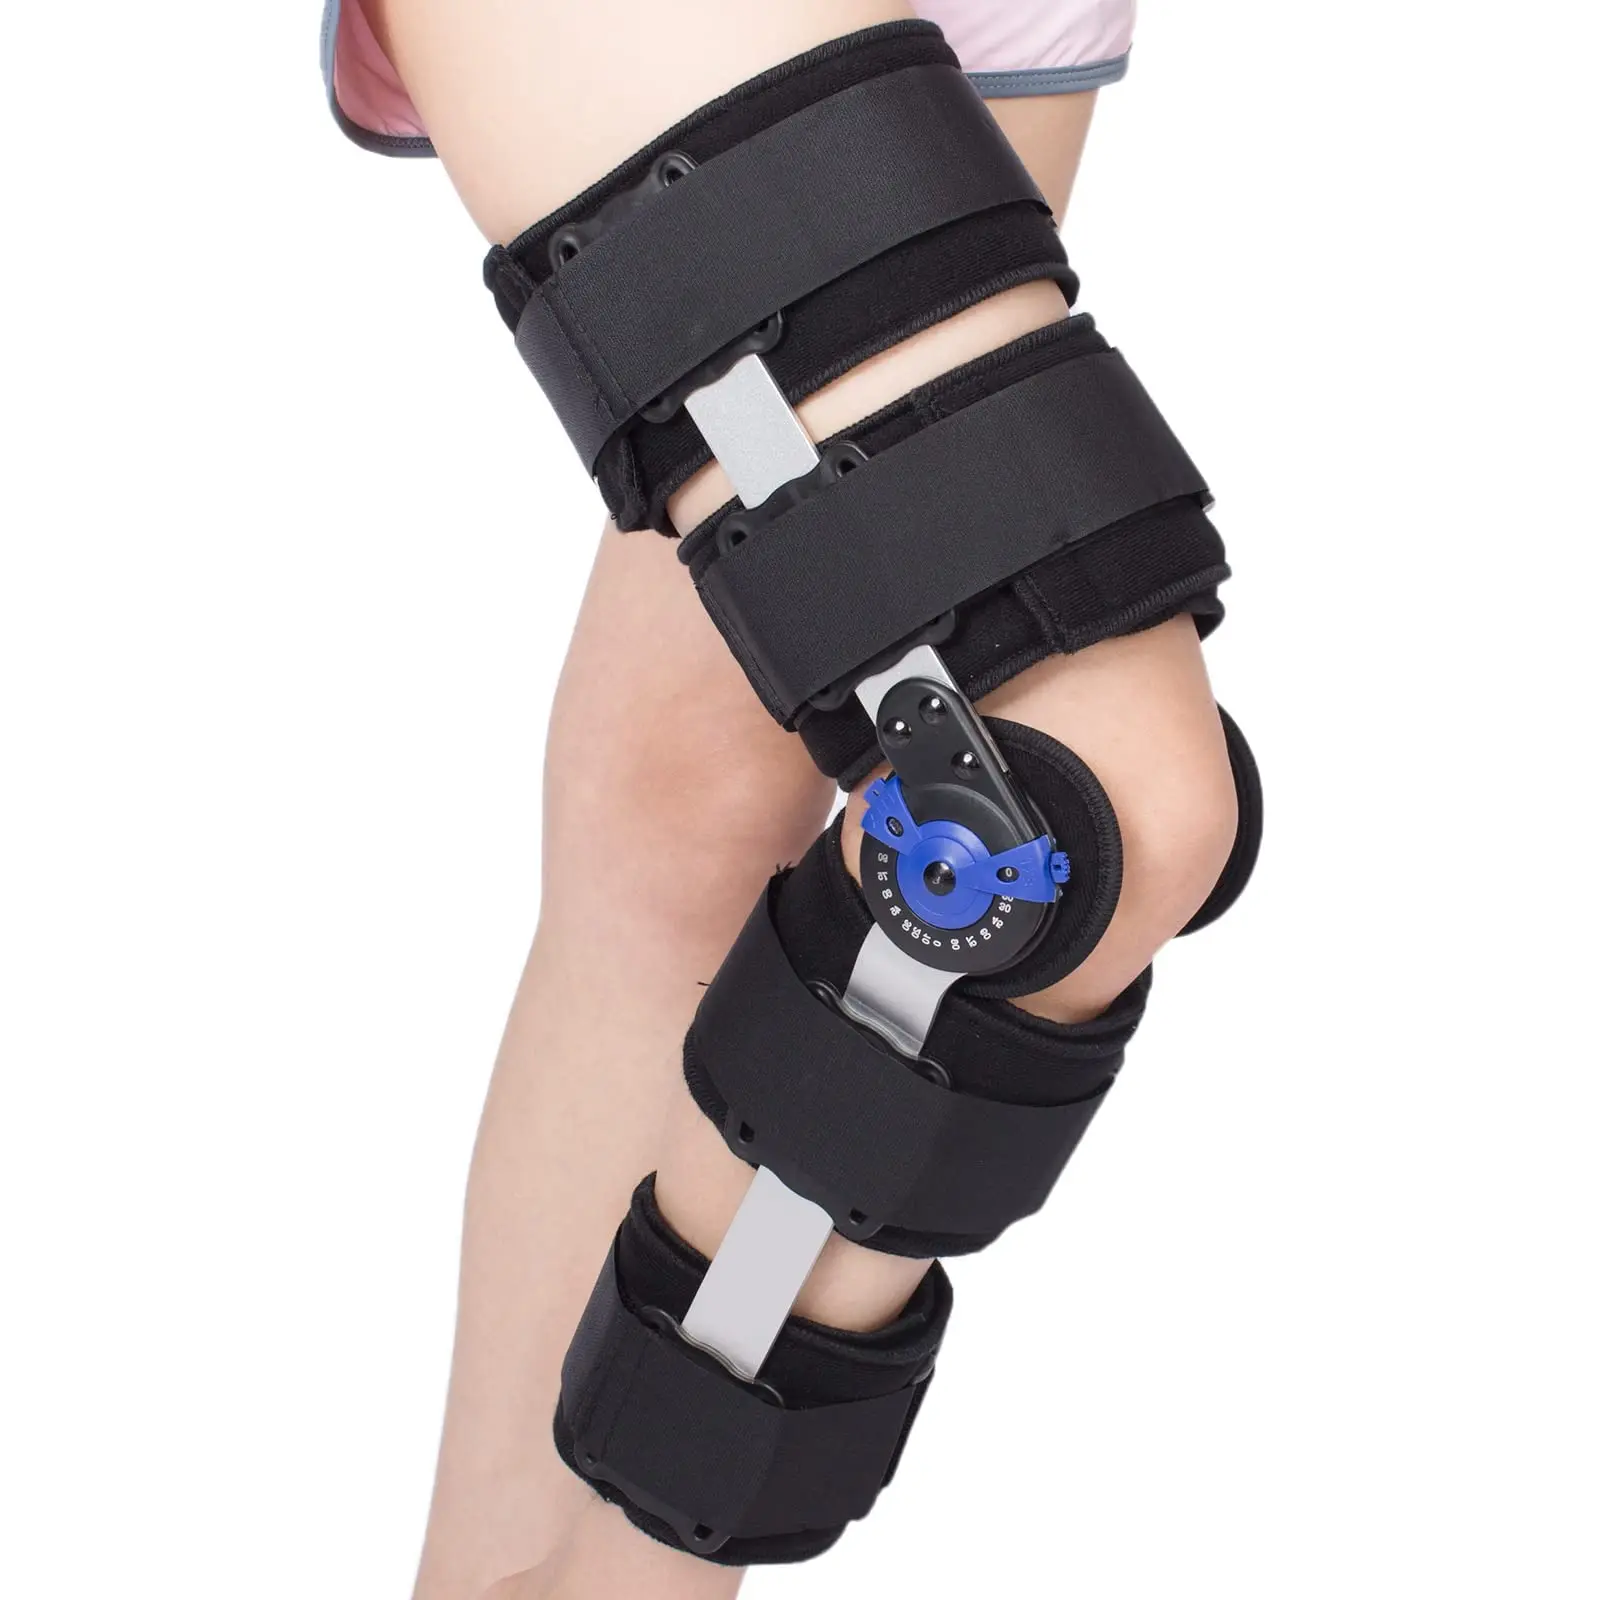 Breg T Scope Premier Post-Op Hinged ROM Knee Brace Universal Adjustable  Size Left or Right for Recovery Stabilization - AliExpress